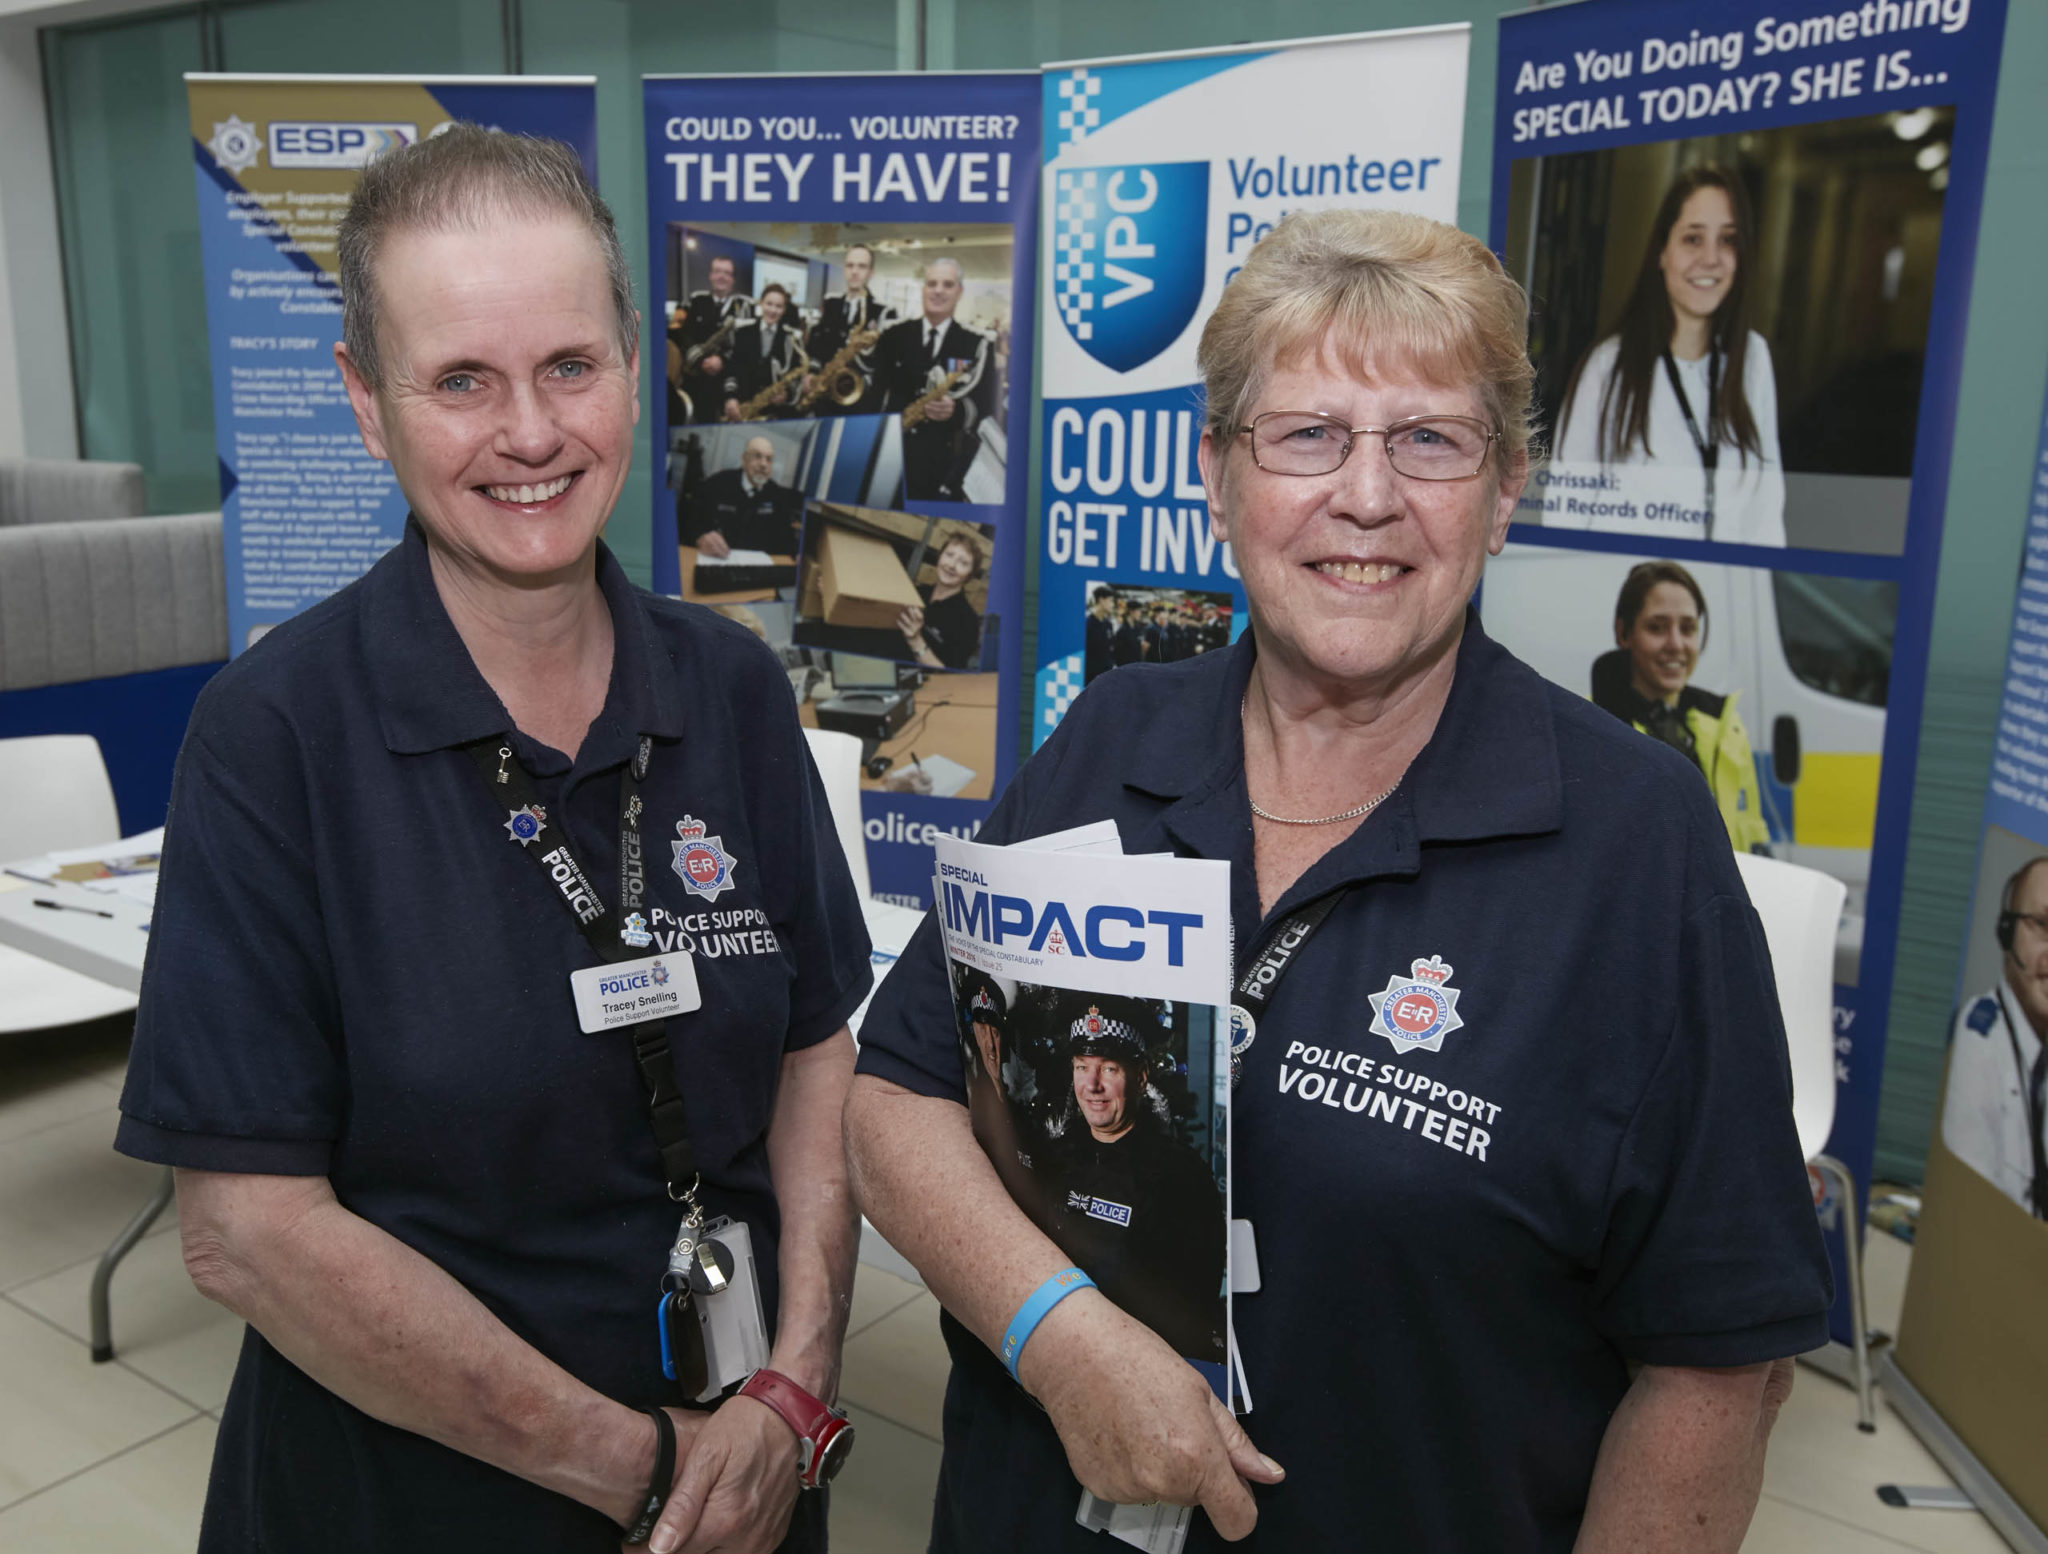 A photograph shows two police support volunteers during Greater Manchester Police's Volunteers' Week 2017